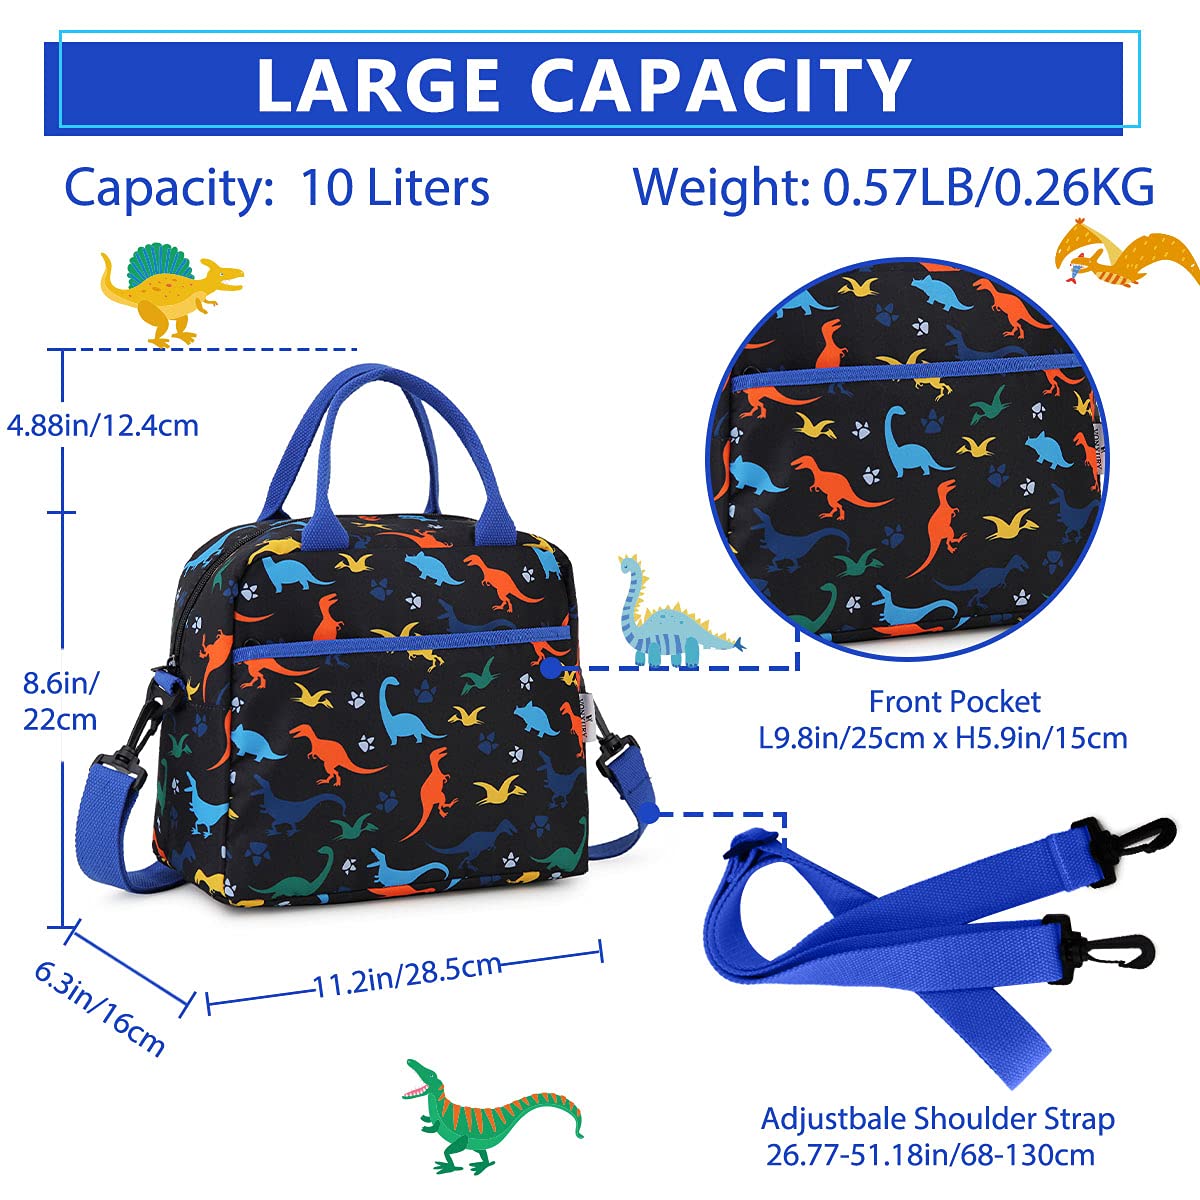 Lunch Bag for Kids, Insulated Boys Lunch Box Bag Black Dinosuar Thermal Lunch Tote with Removable Shoulder Strap, VONXURY